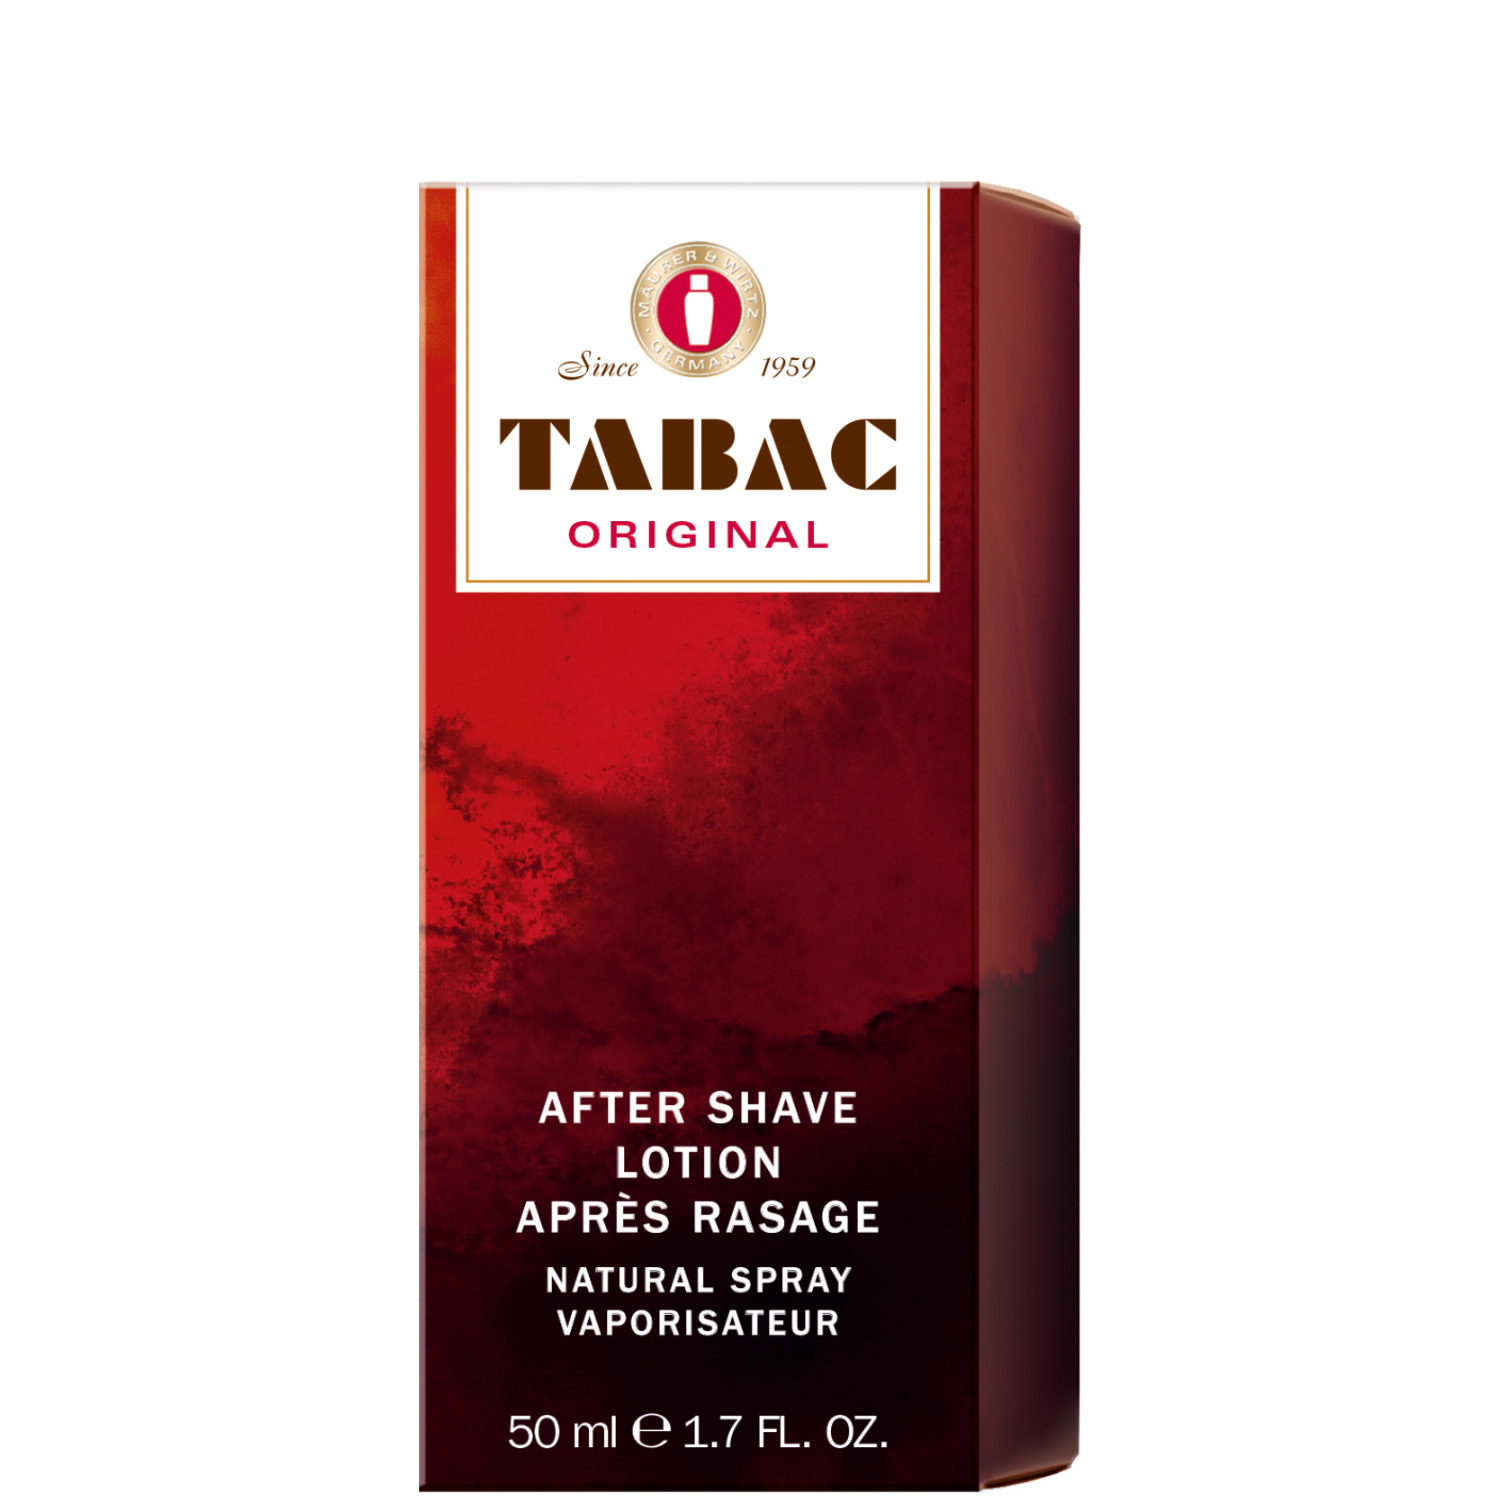 Tabac Original After Shave Lotion Natural Spray 50ml